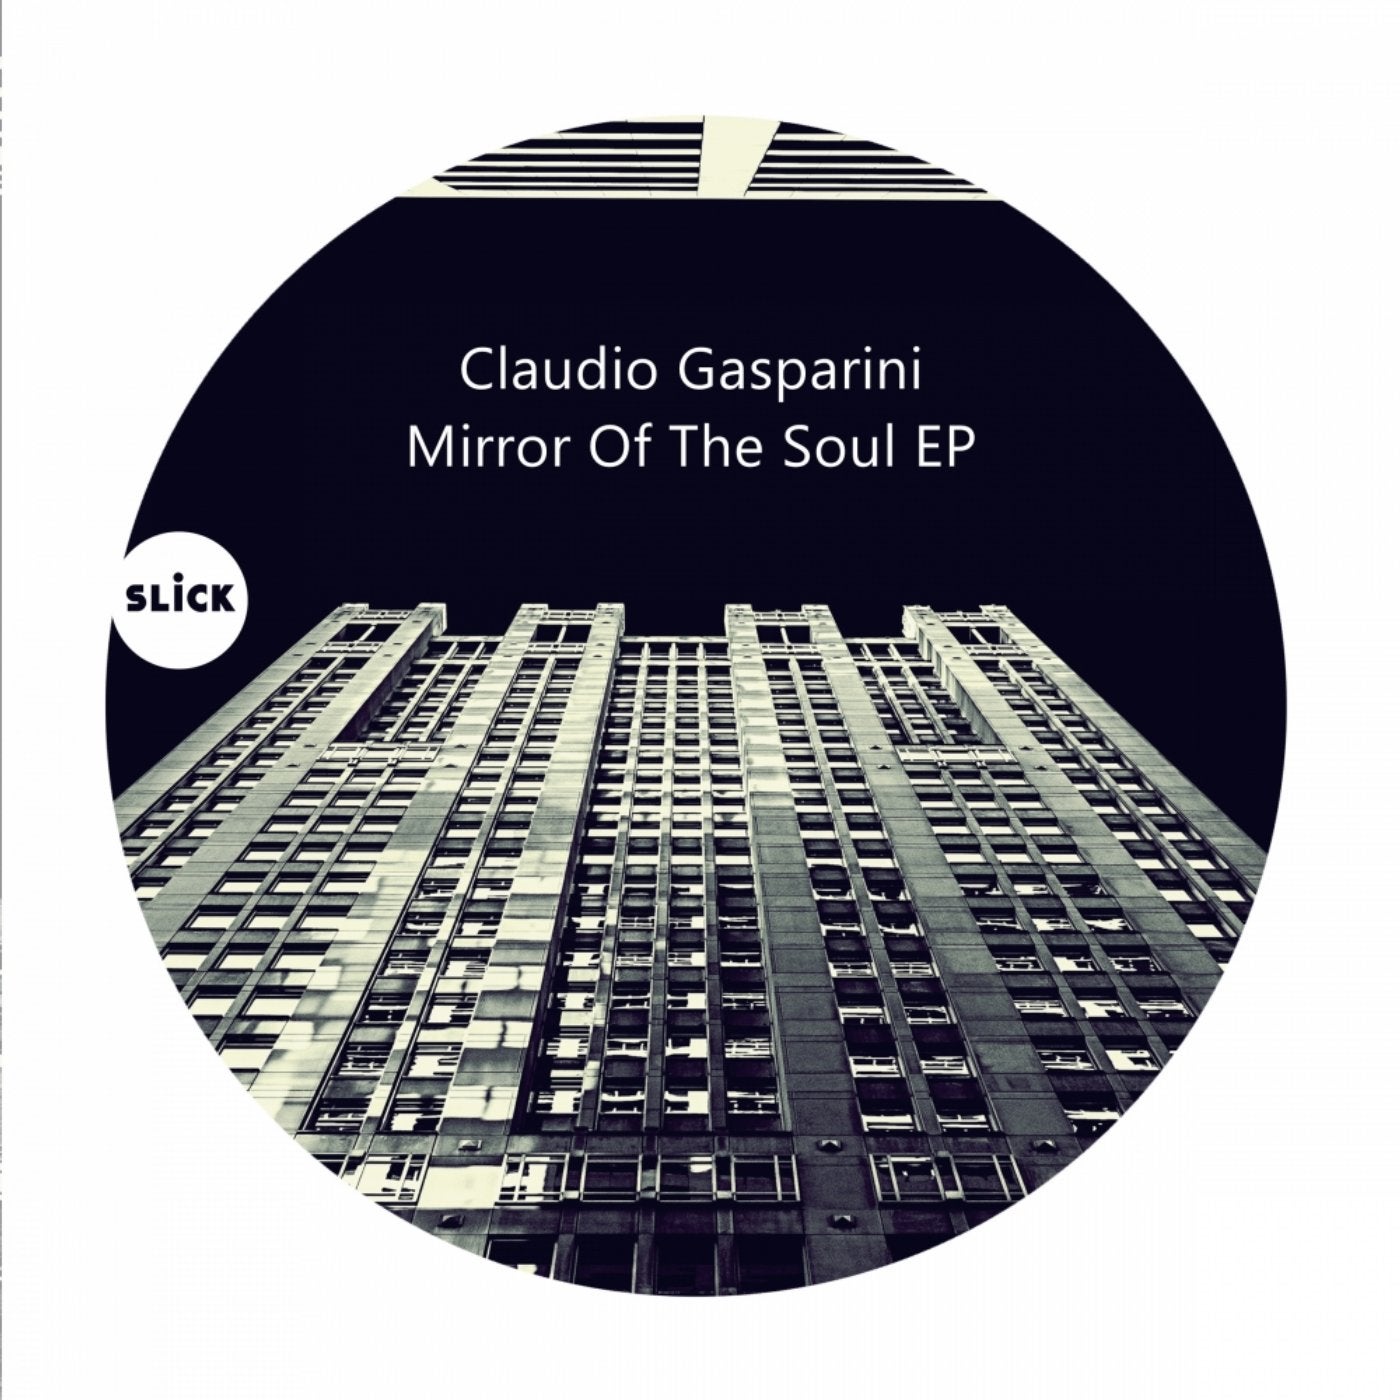 Mirror Of The Soul EP